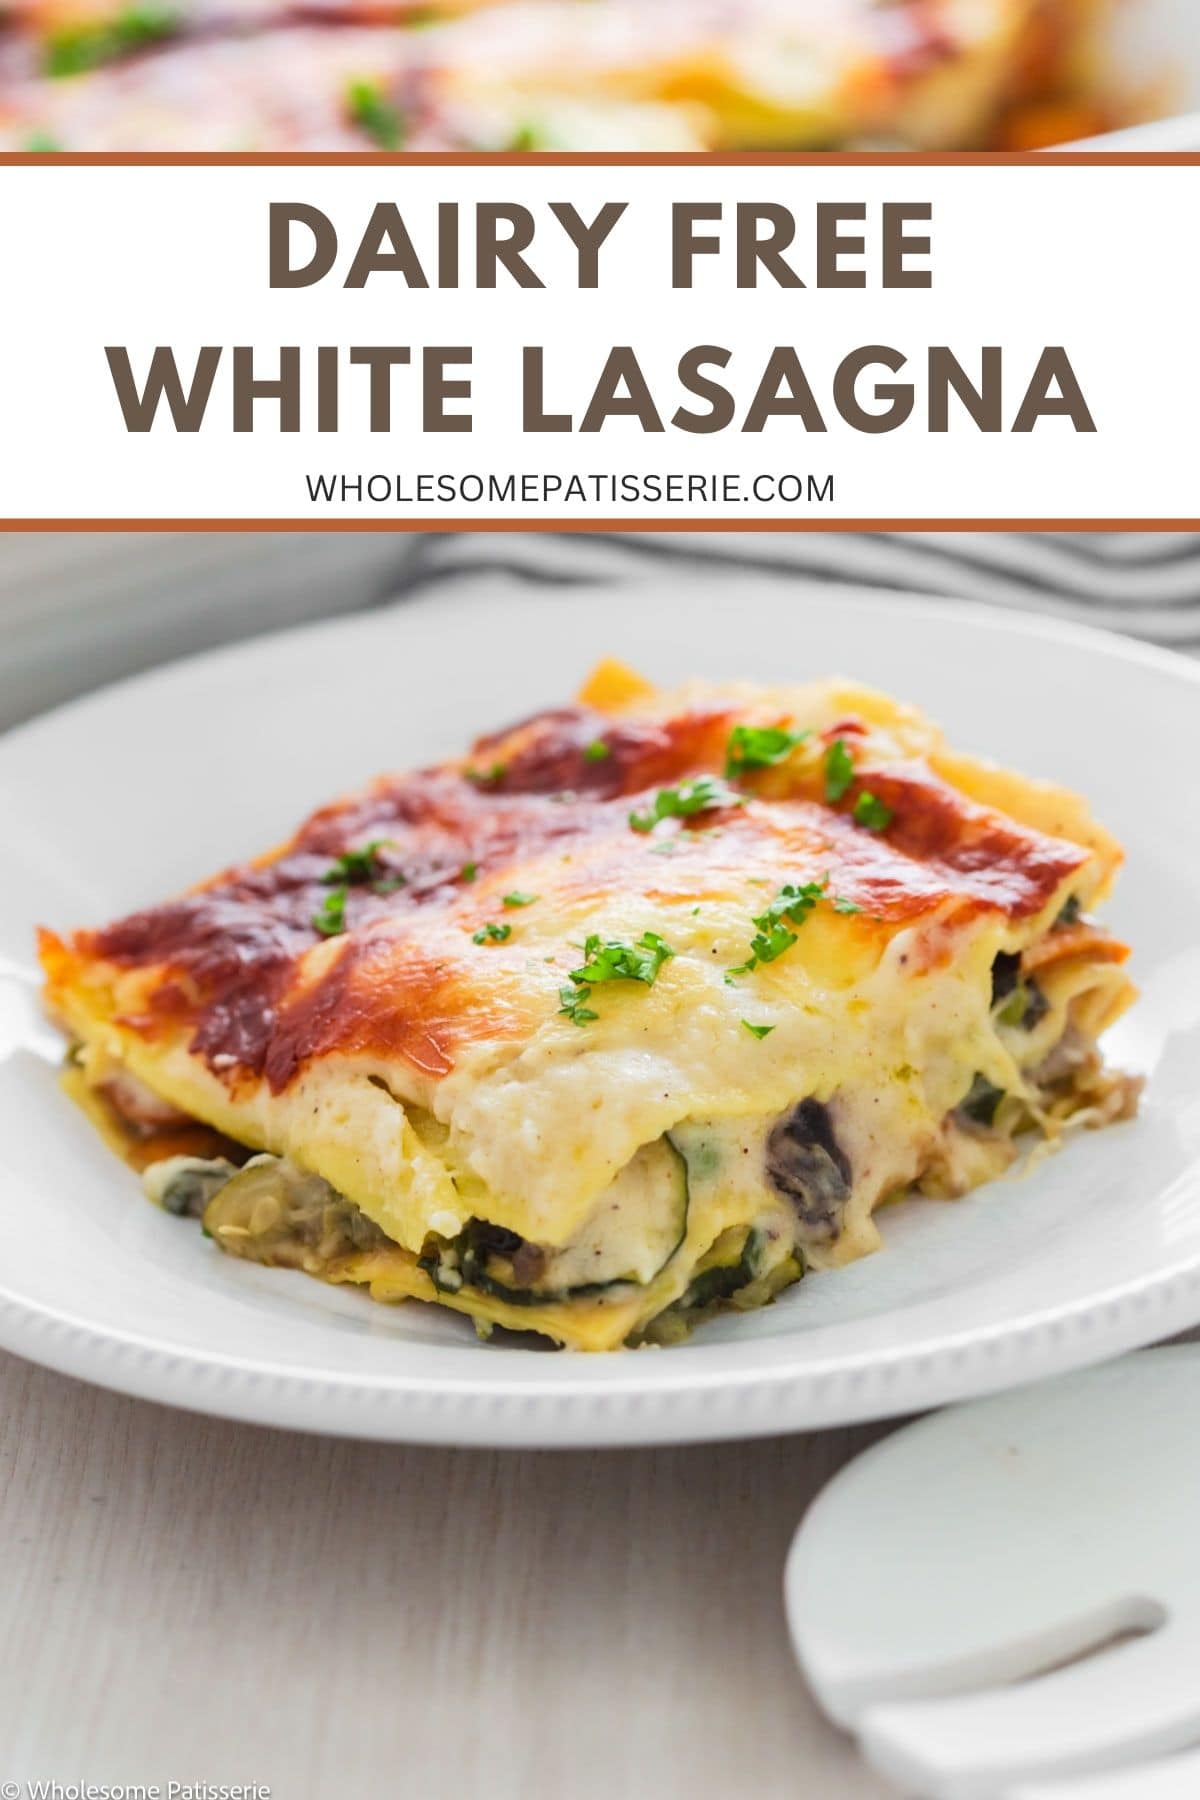 Dairy free white lasagna served on plate.